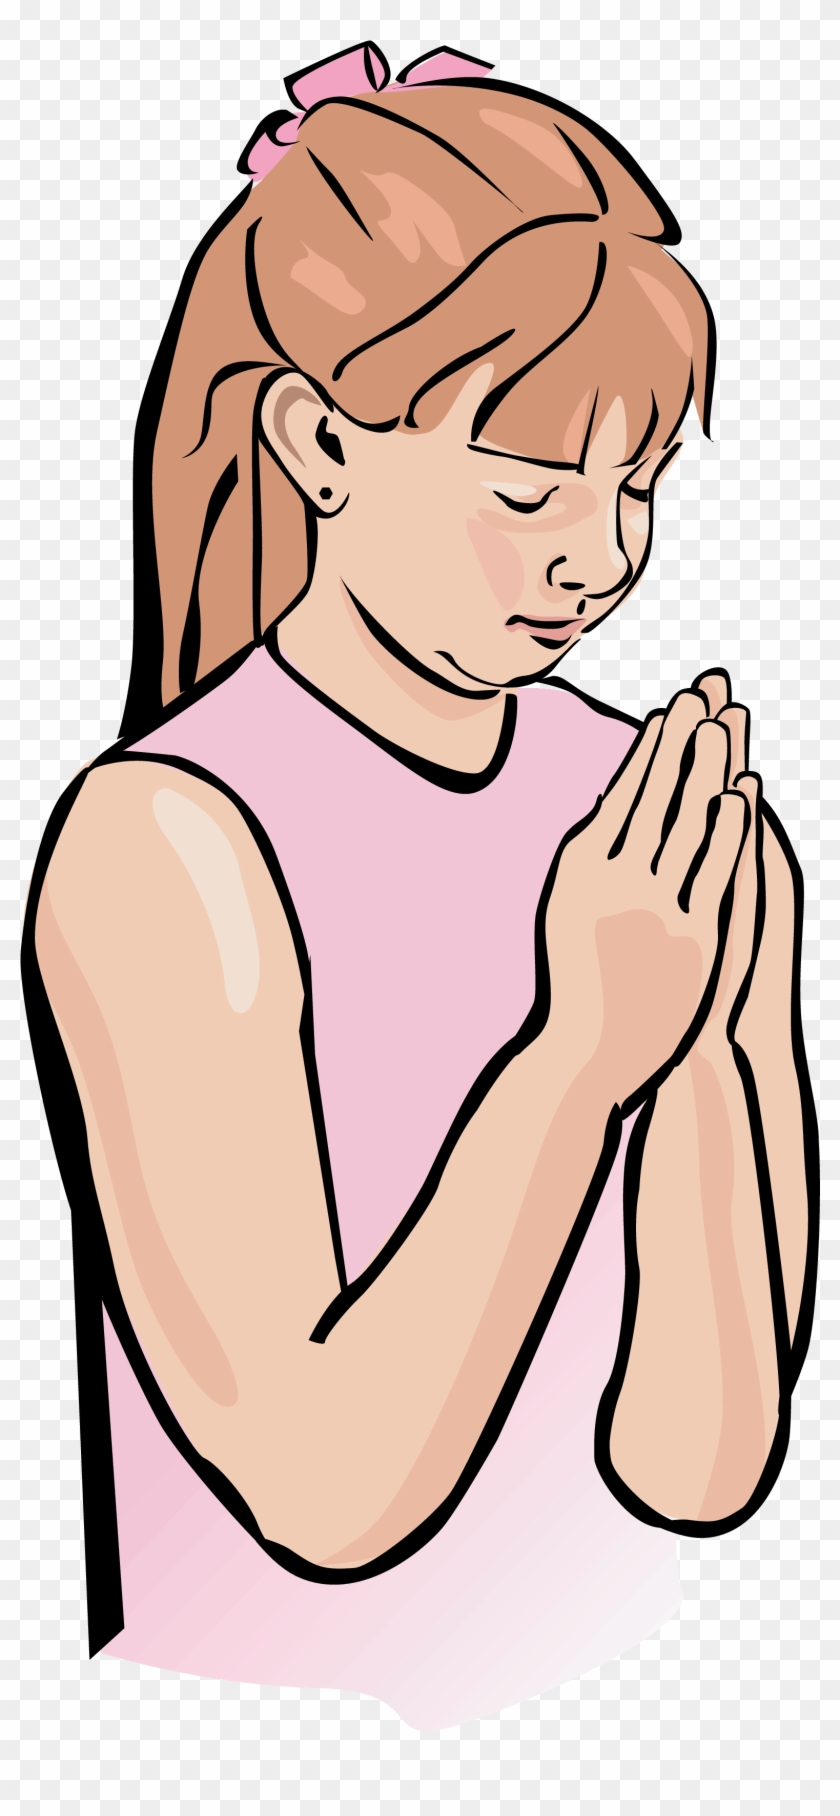 Child Prayer Images Png Image Clipart - Girl Praying Clipart Transparent Png #12371